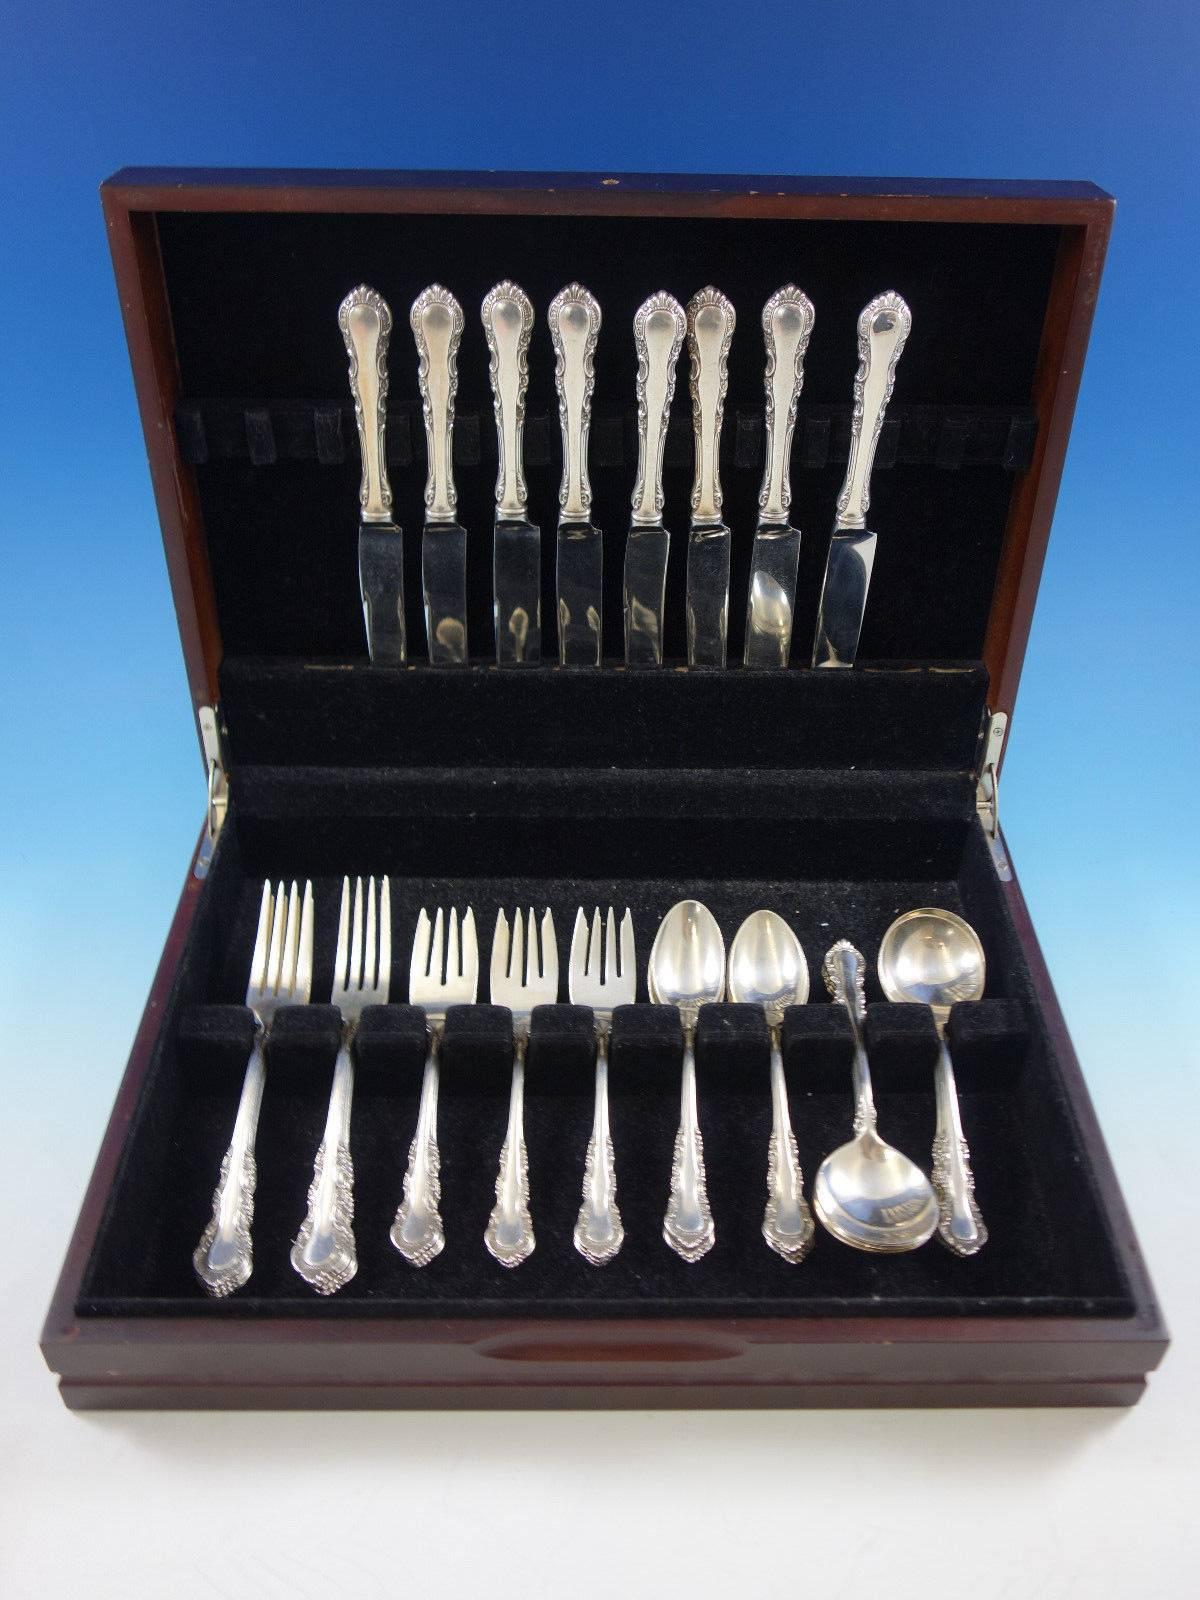 Georgian Rose by Reed and Barton sterling silver flatware set of 40 pieces. This set includes: 

Eight knives, 9